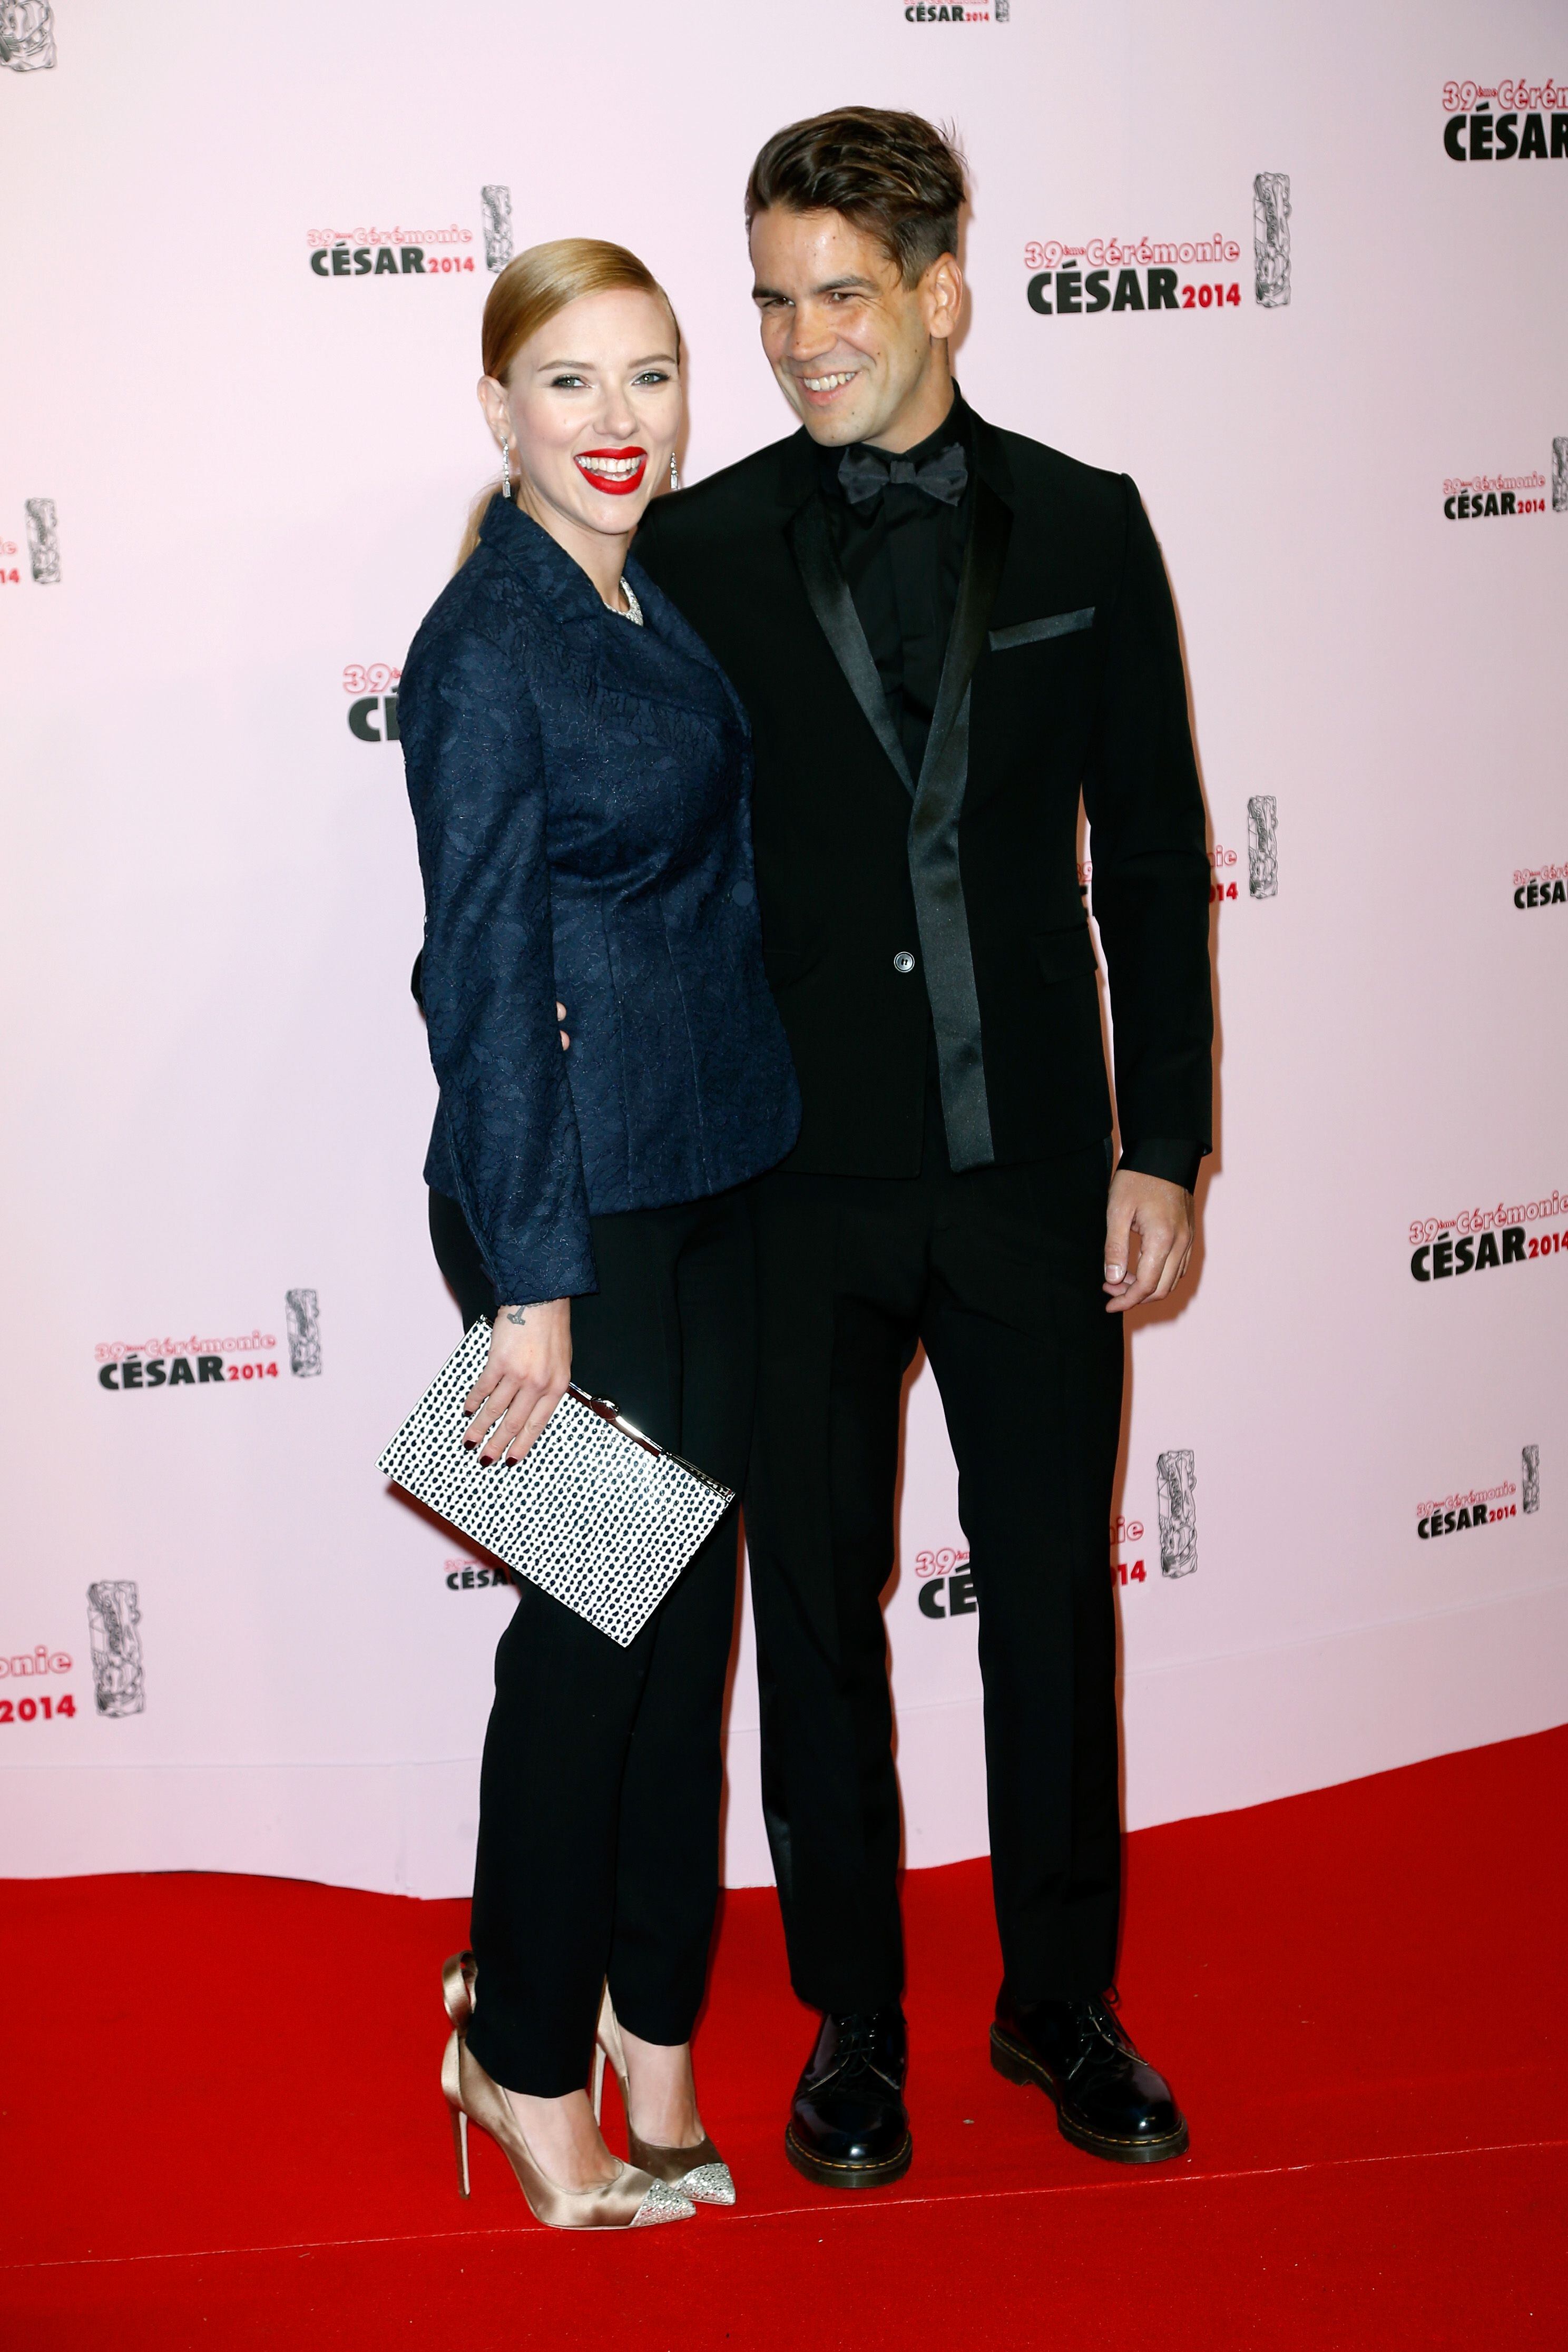 Actress Scarlett Johansson and Romain Dauriac arrive for the 39th Cesar Film Awards 2014 at Theatre du Chatelet on February 28, 2014, in Paris, France.